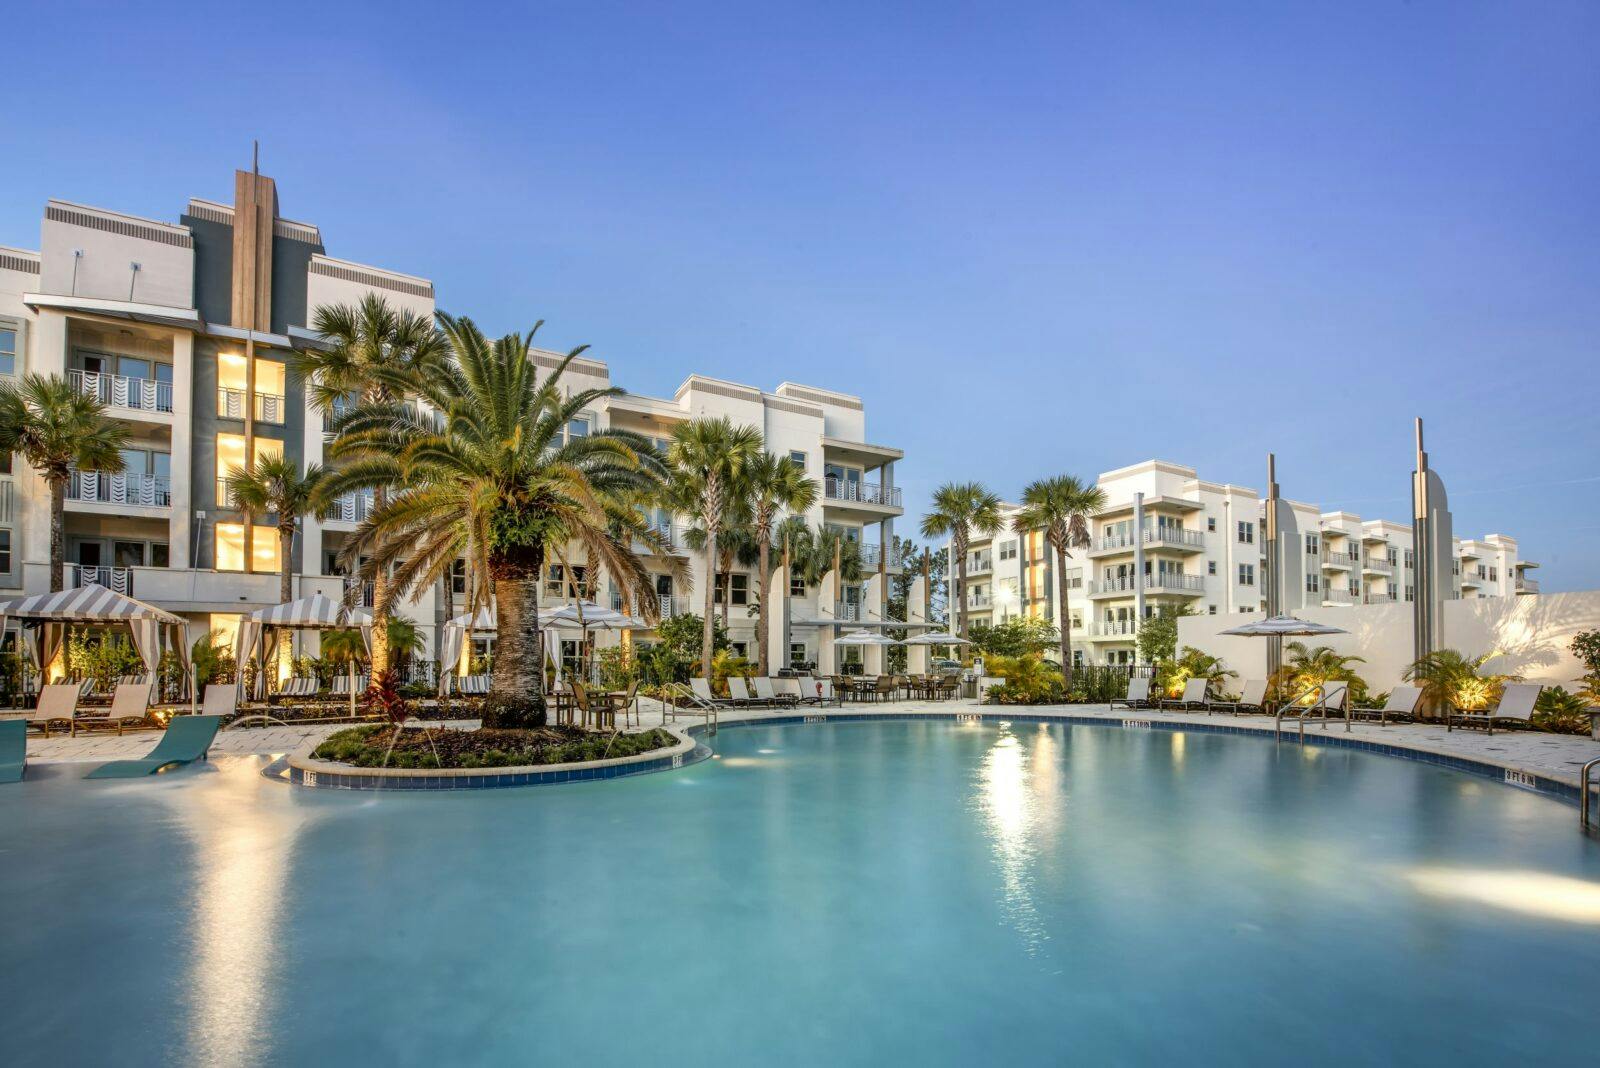 Exclusive apartment buildings stands before a glistening swimming pool surrounded by palm trees and bushes.